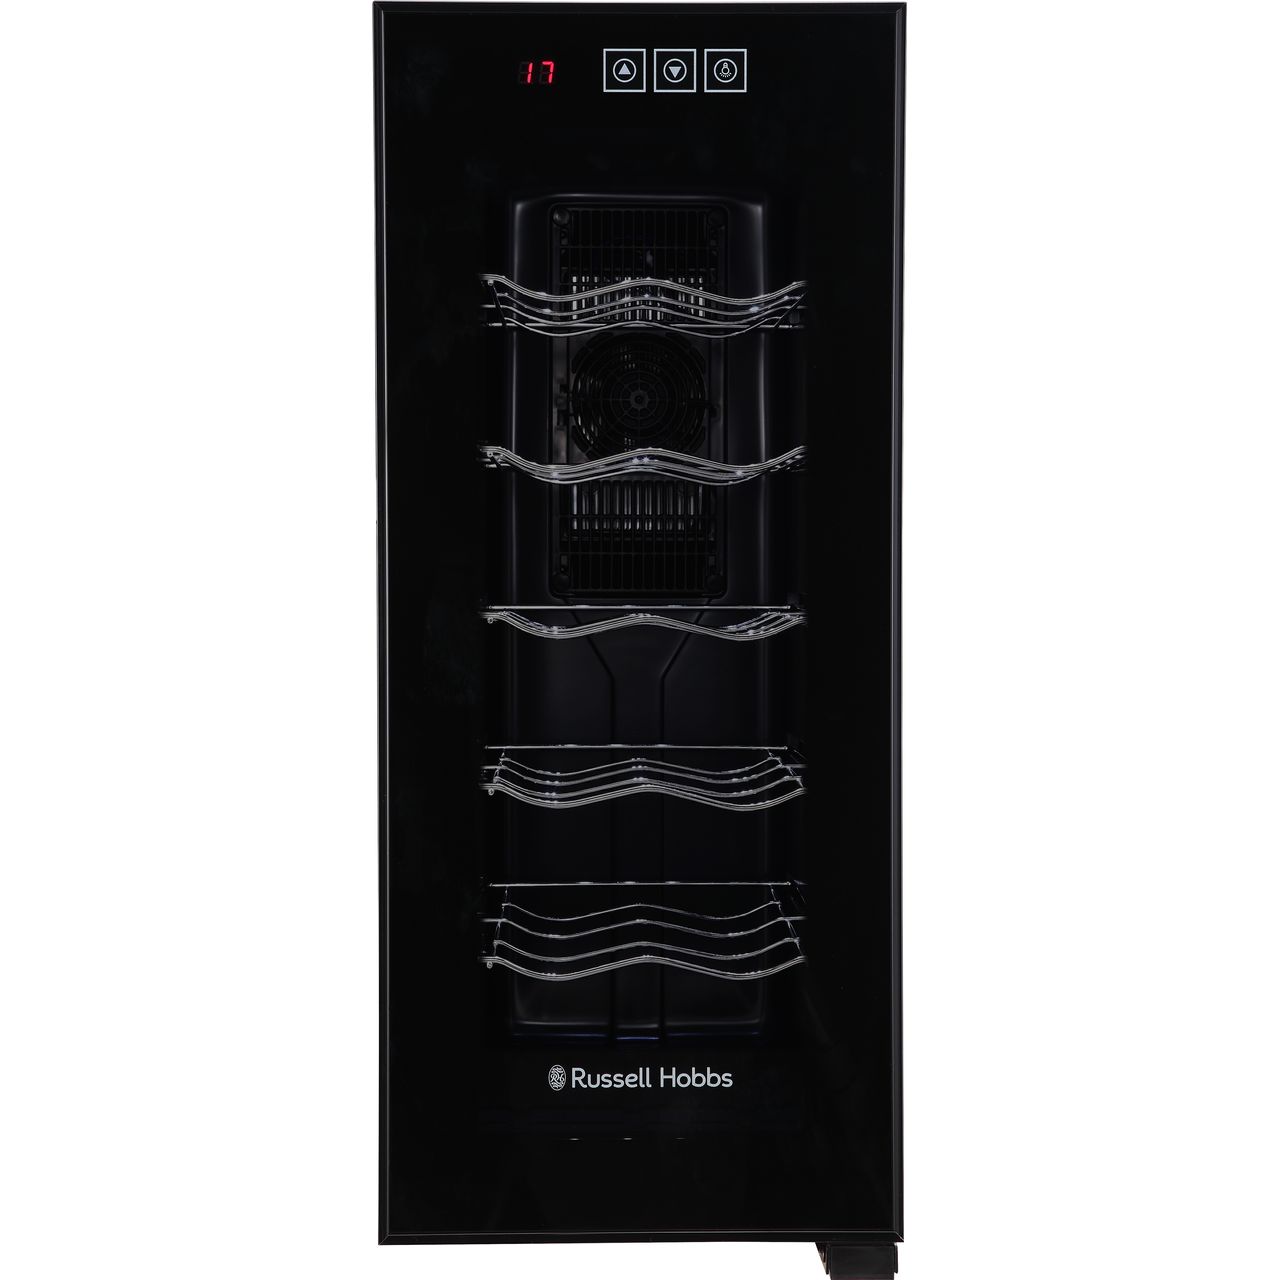 Russell Hobbs RH12WC3 Wine Cooler Review